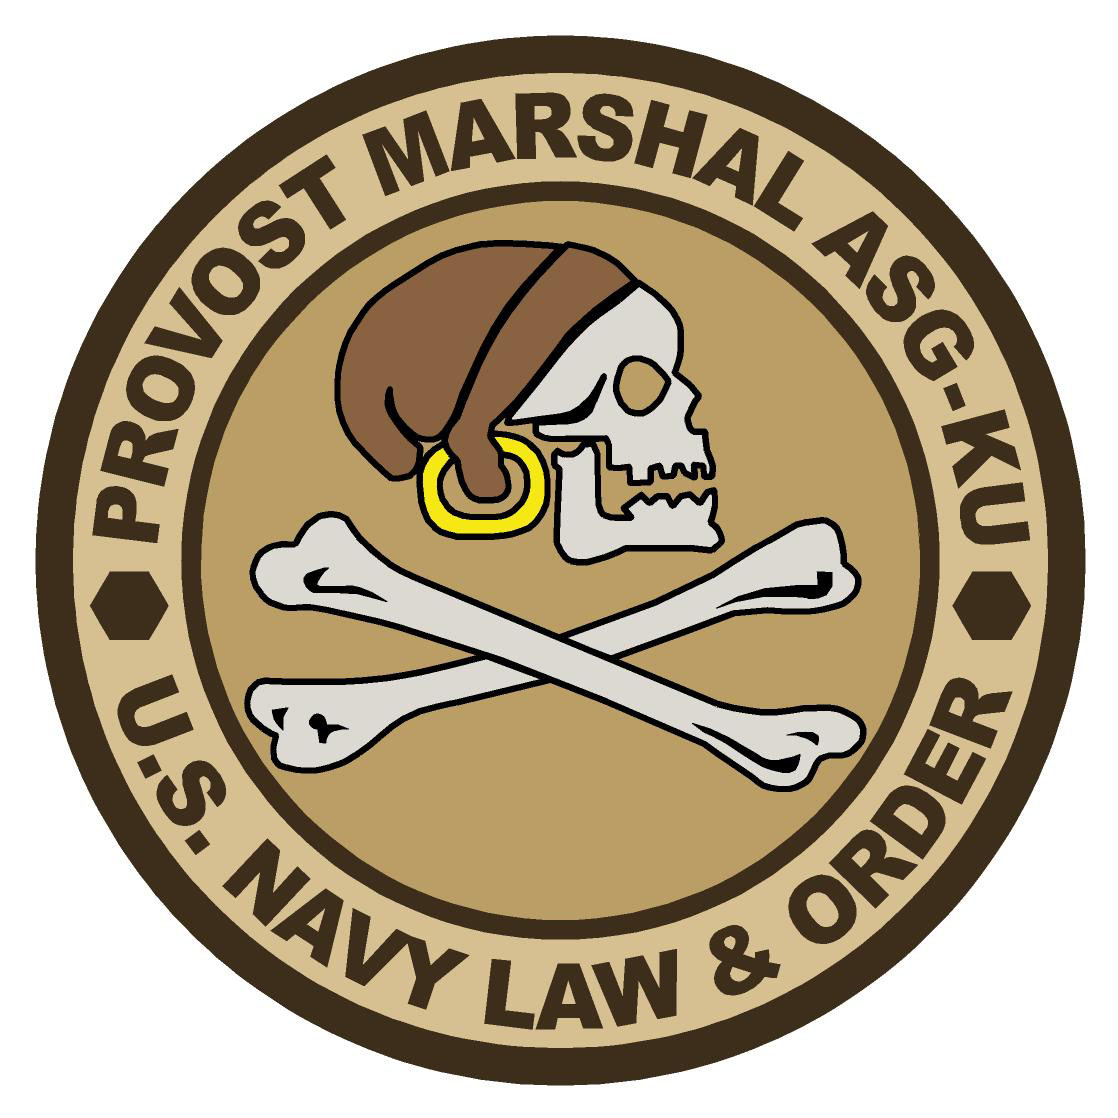 US_Navy_Law___Order_Provost_Marshal_one.jpg